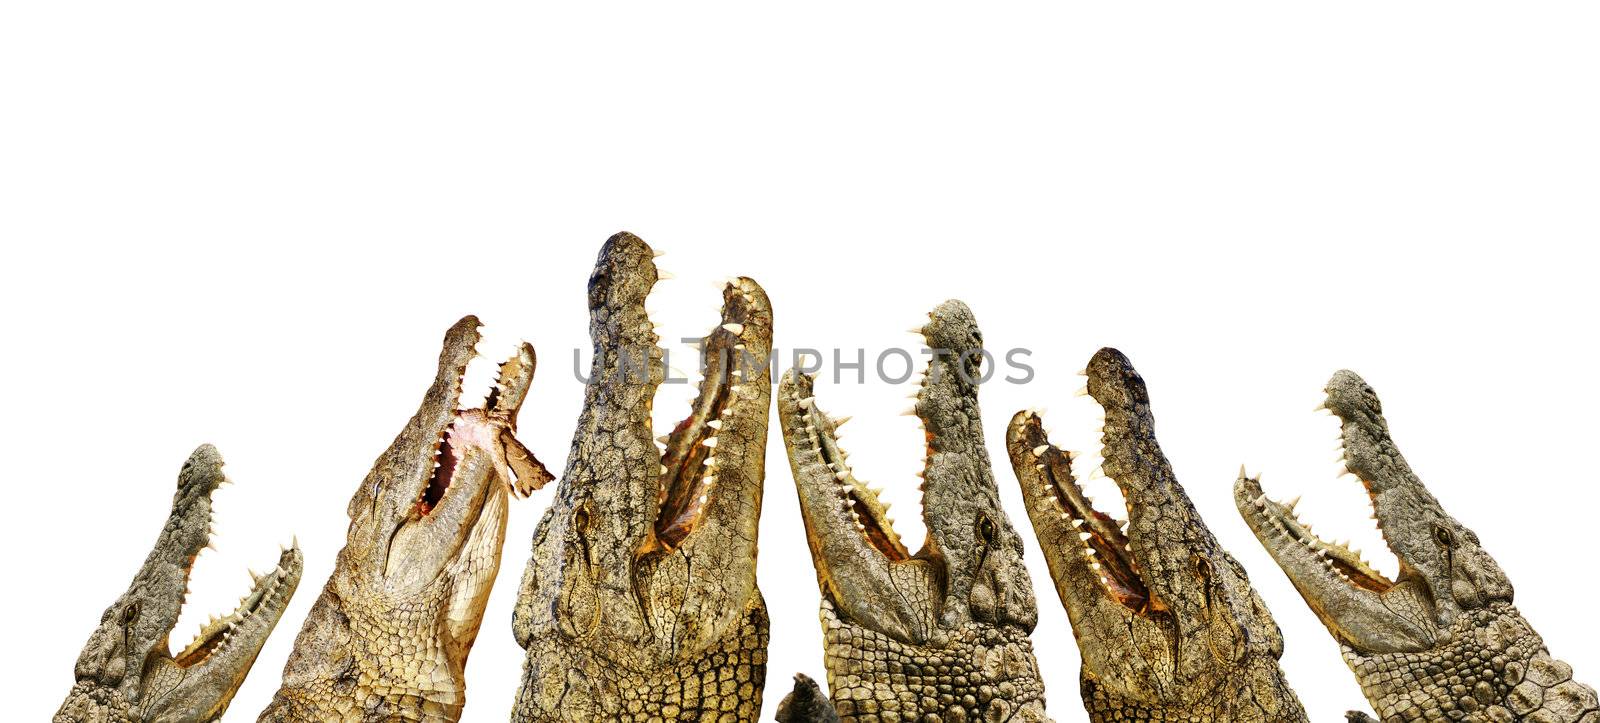 alligators with open mouths  by photochecker